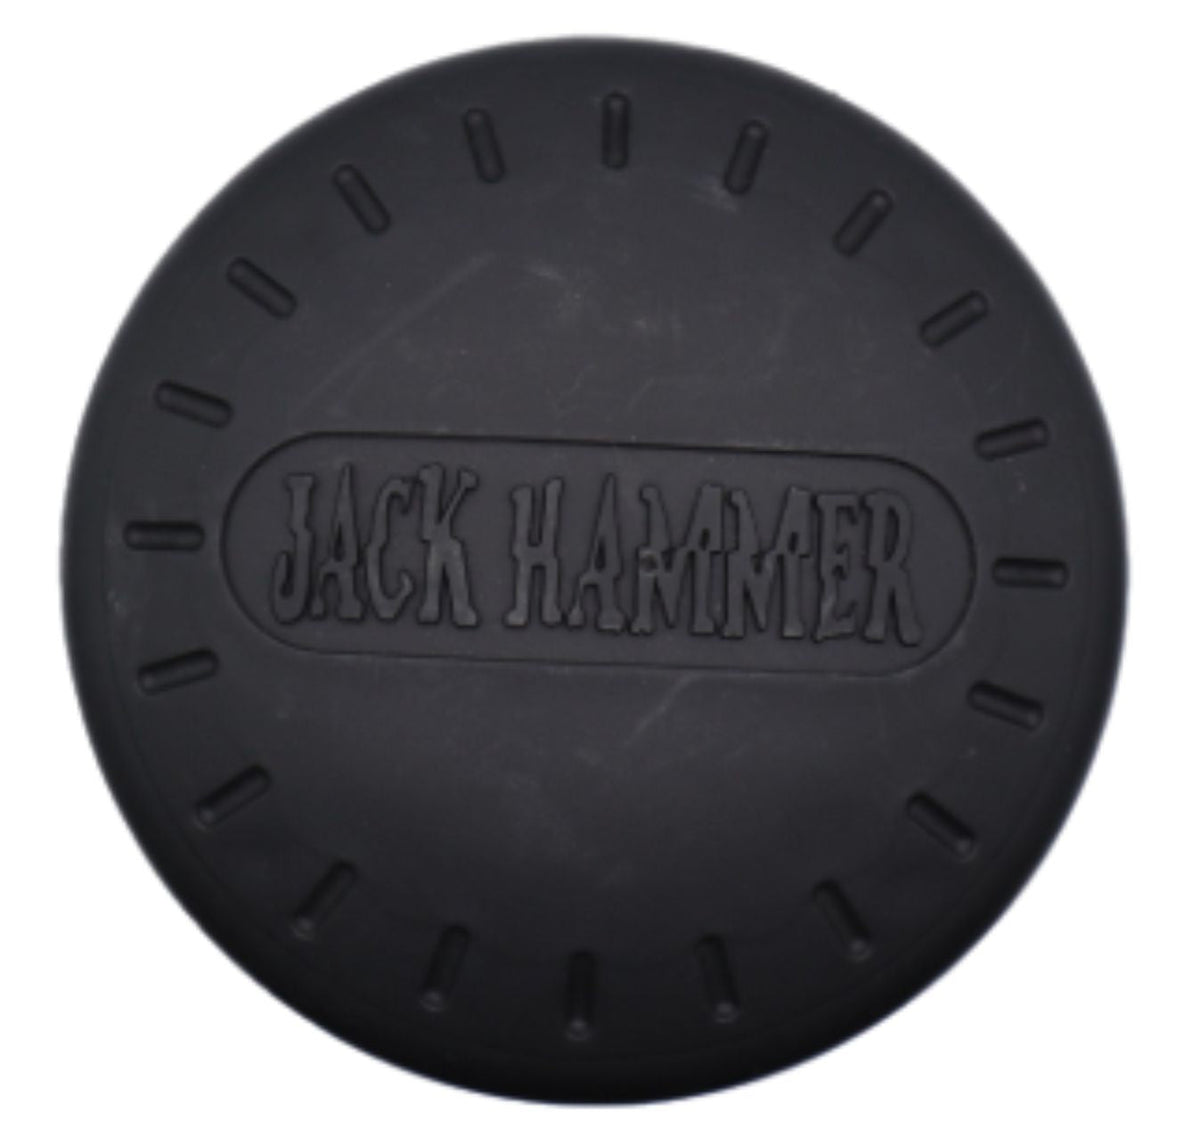 Powercall Jack Hammer Low Frequency Siren Addition - Powercall Sirens LLC